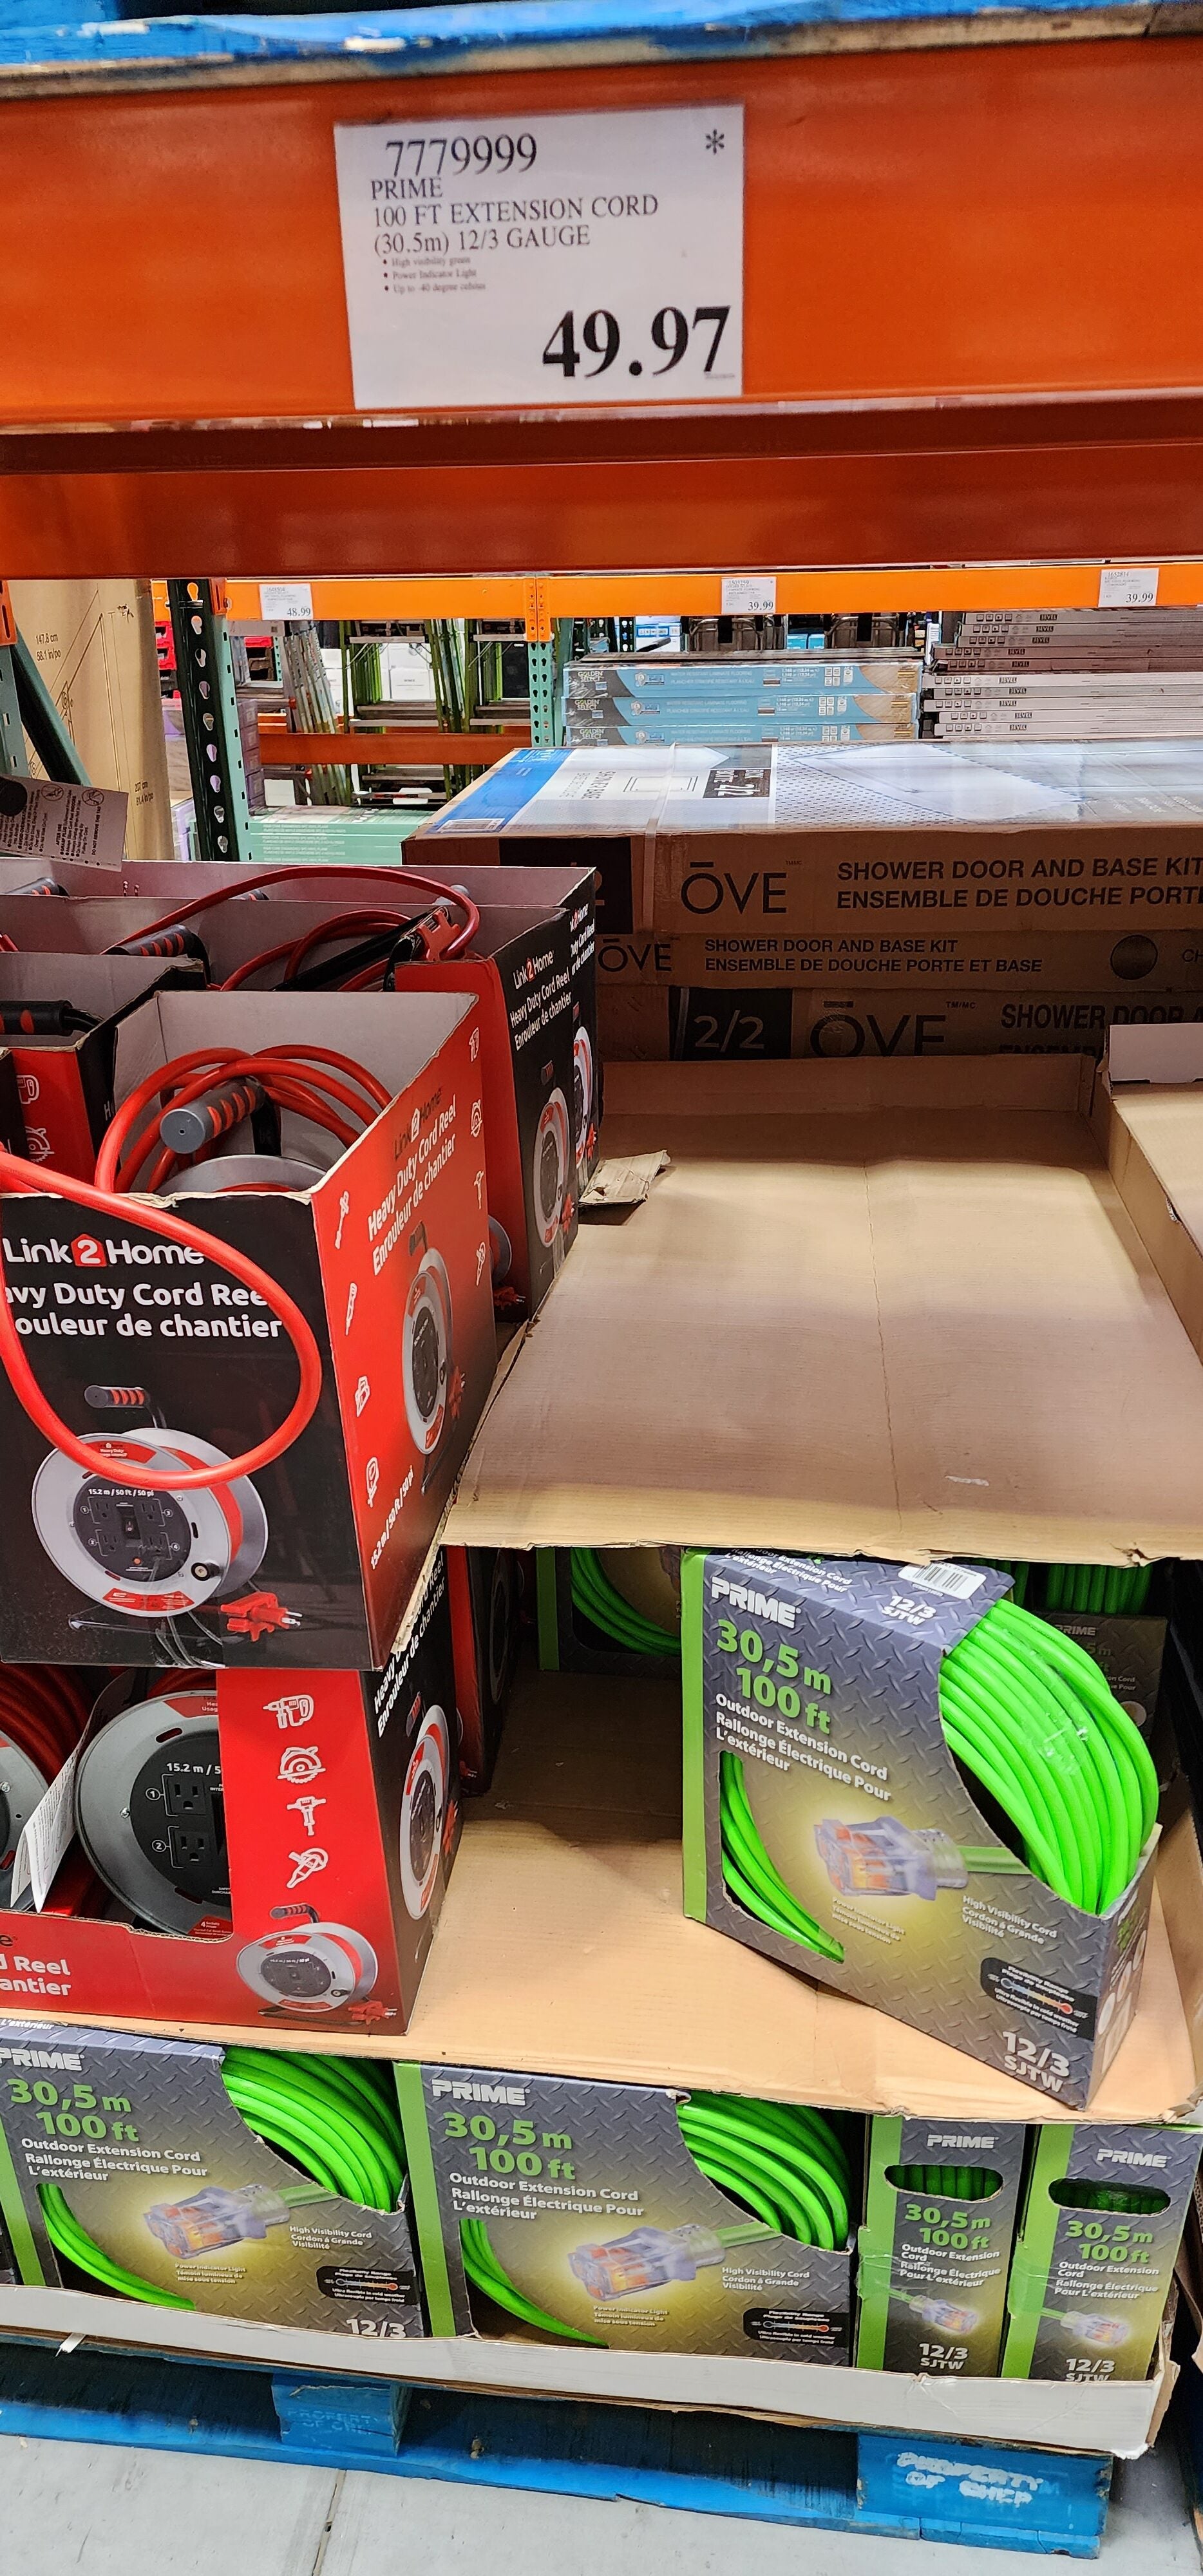 Costco] Prime 100ft 12/3 green extension cord - $49.97 reg $69 - Page 2 -  RedFlagDeals.com Forums